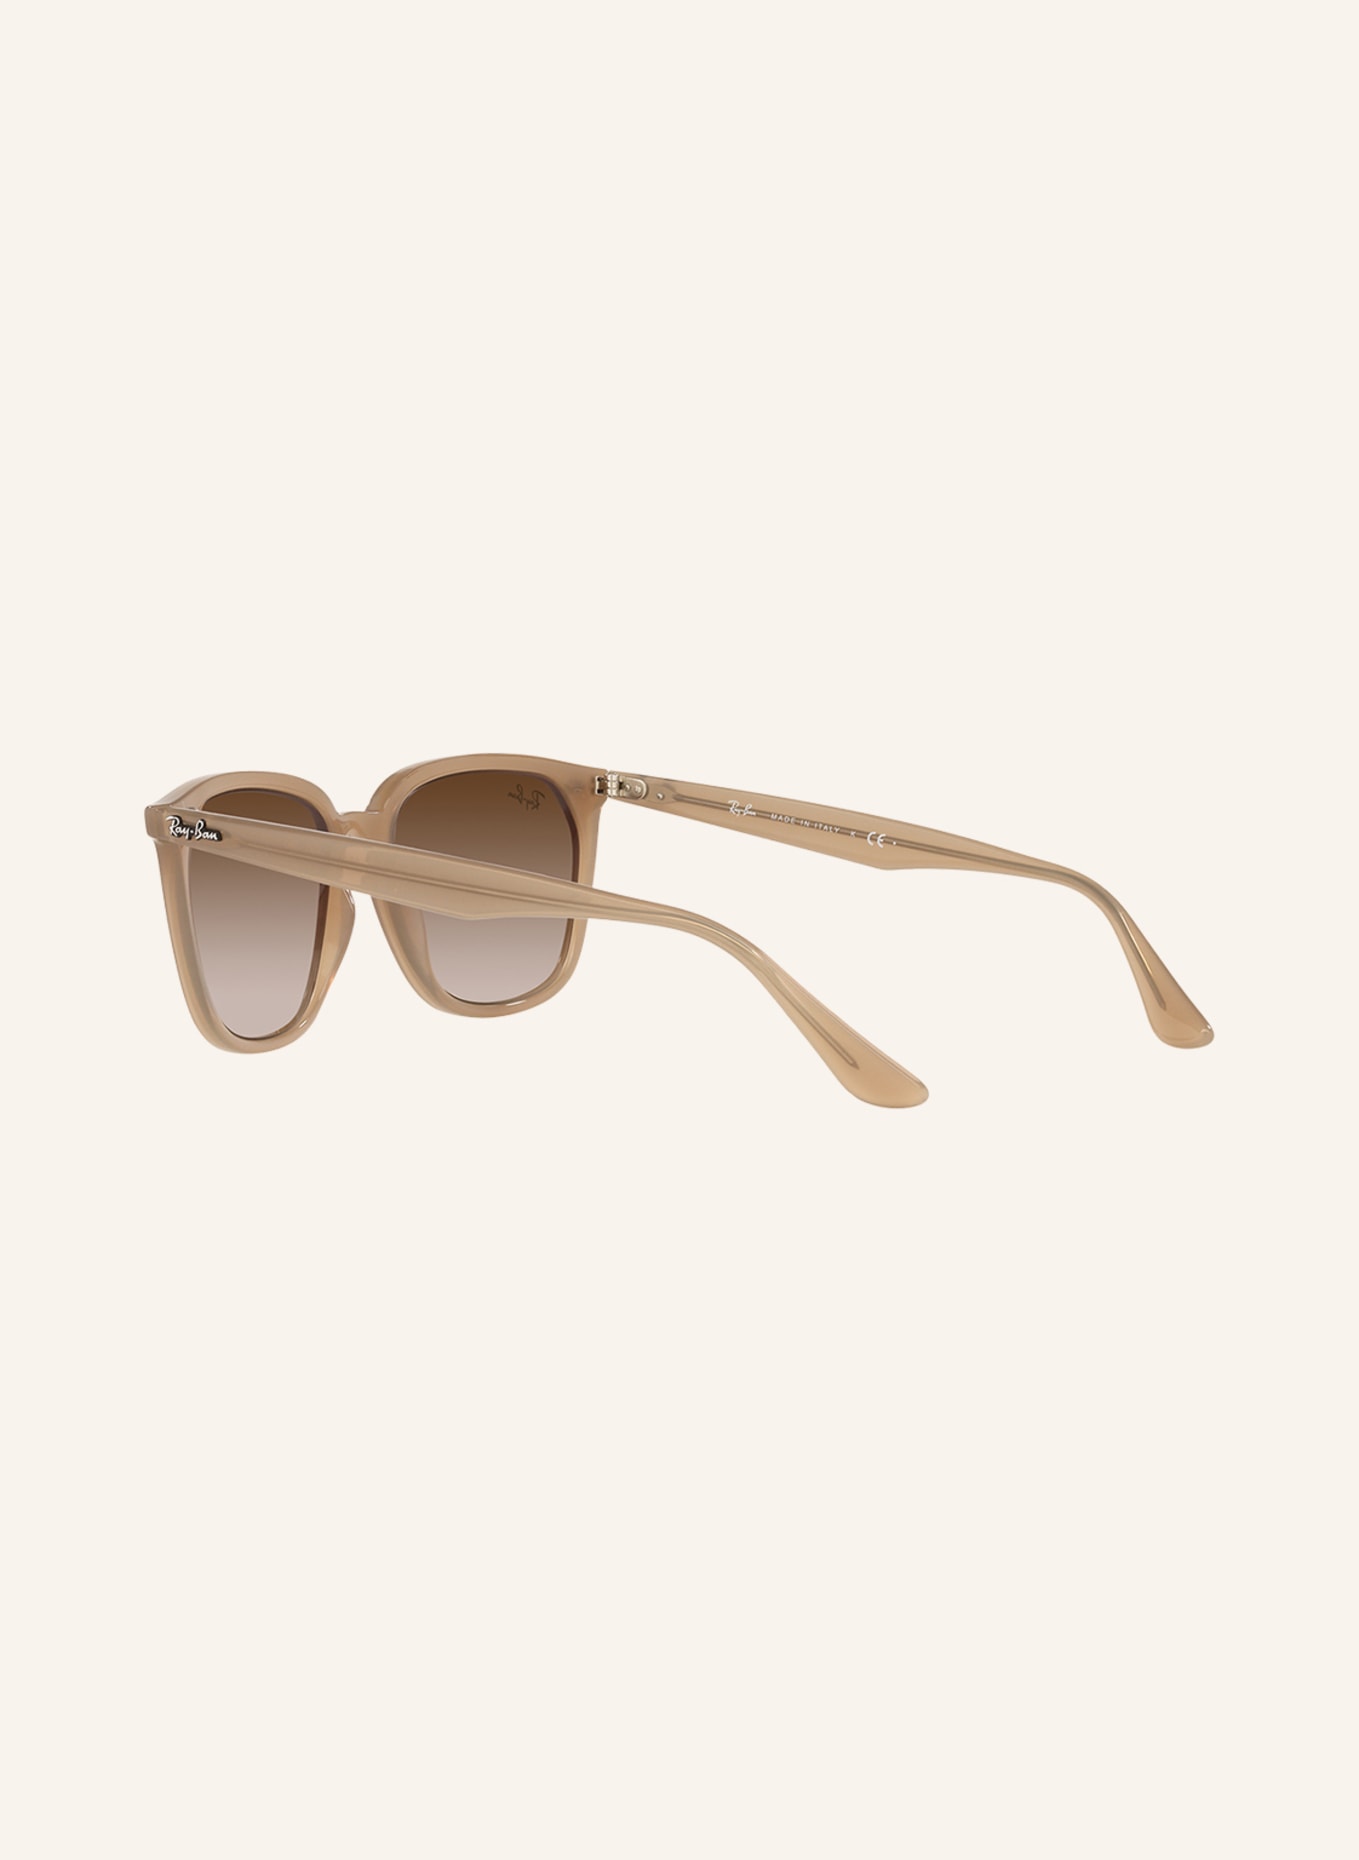 Ray-Ban Sunglasses RB4362, Color: 616613 - LIGHT BROWN/ BROWN GRADIENT (Image 4)